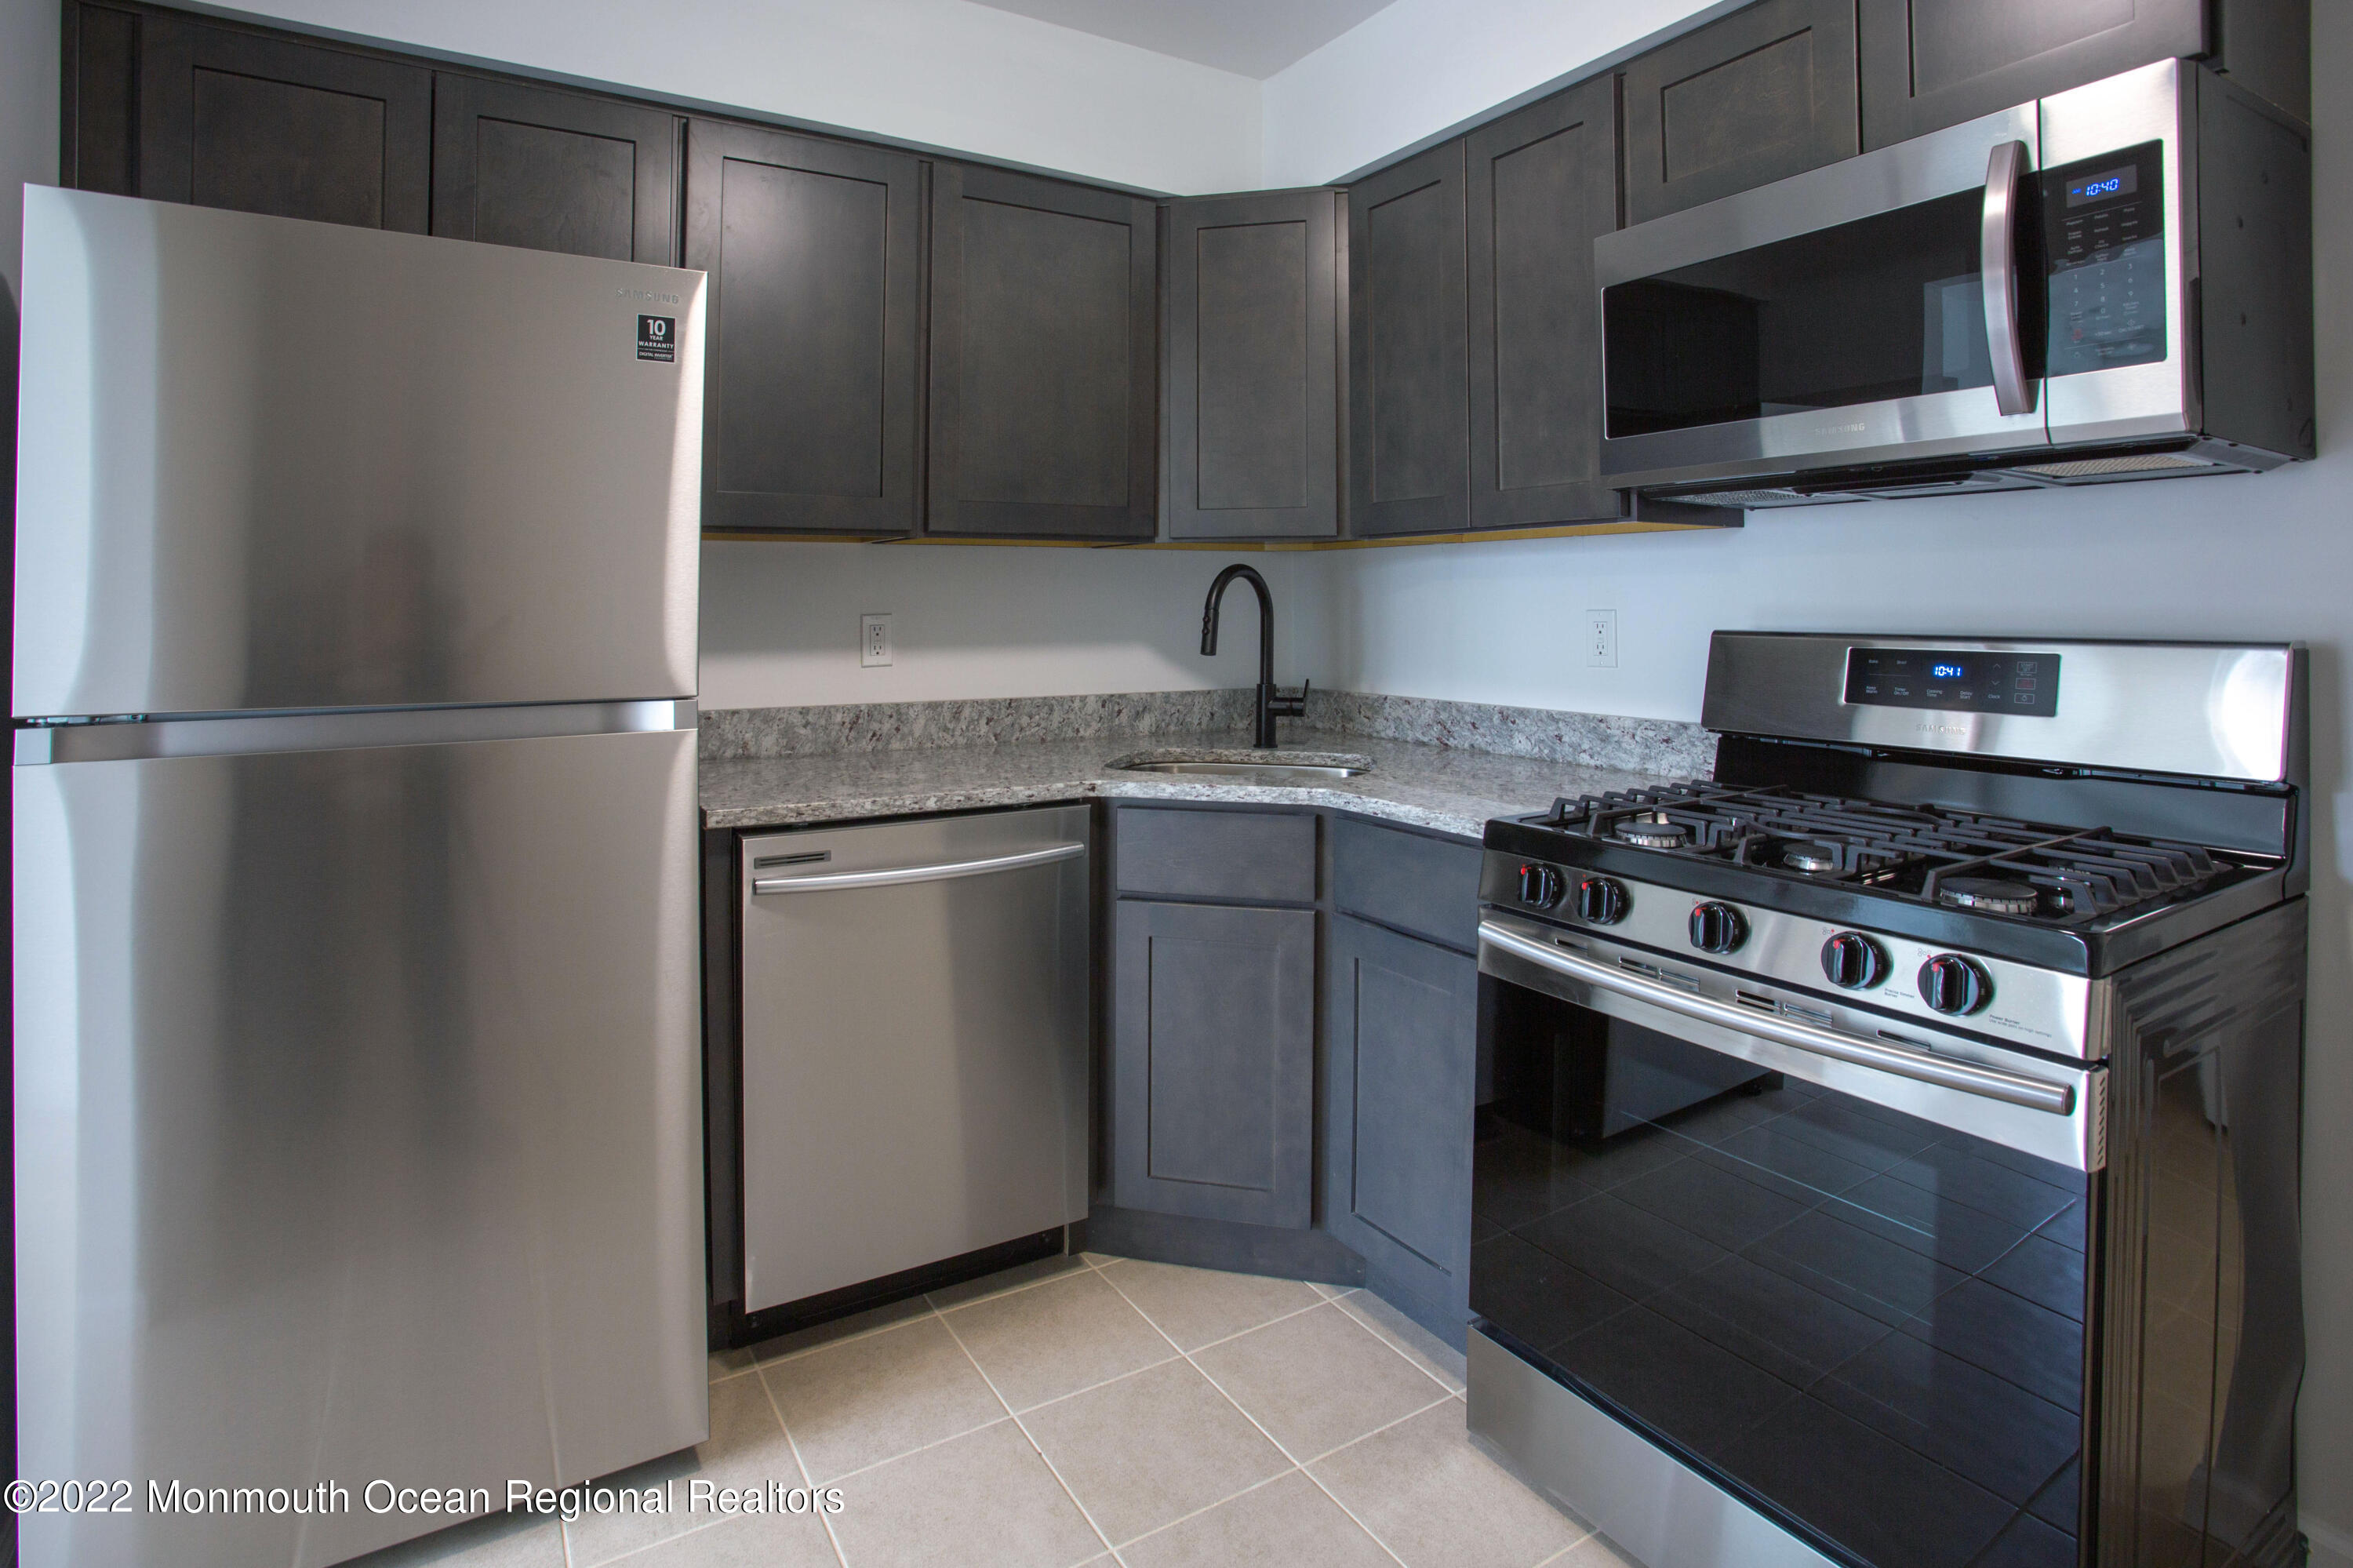 a kitchen with stainless steel appliances a refrigerator stove and microwave